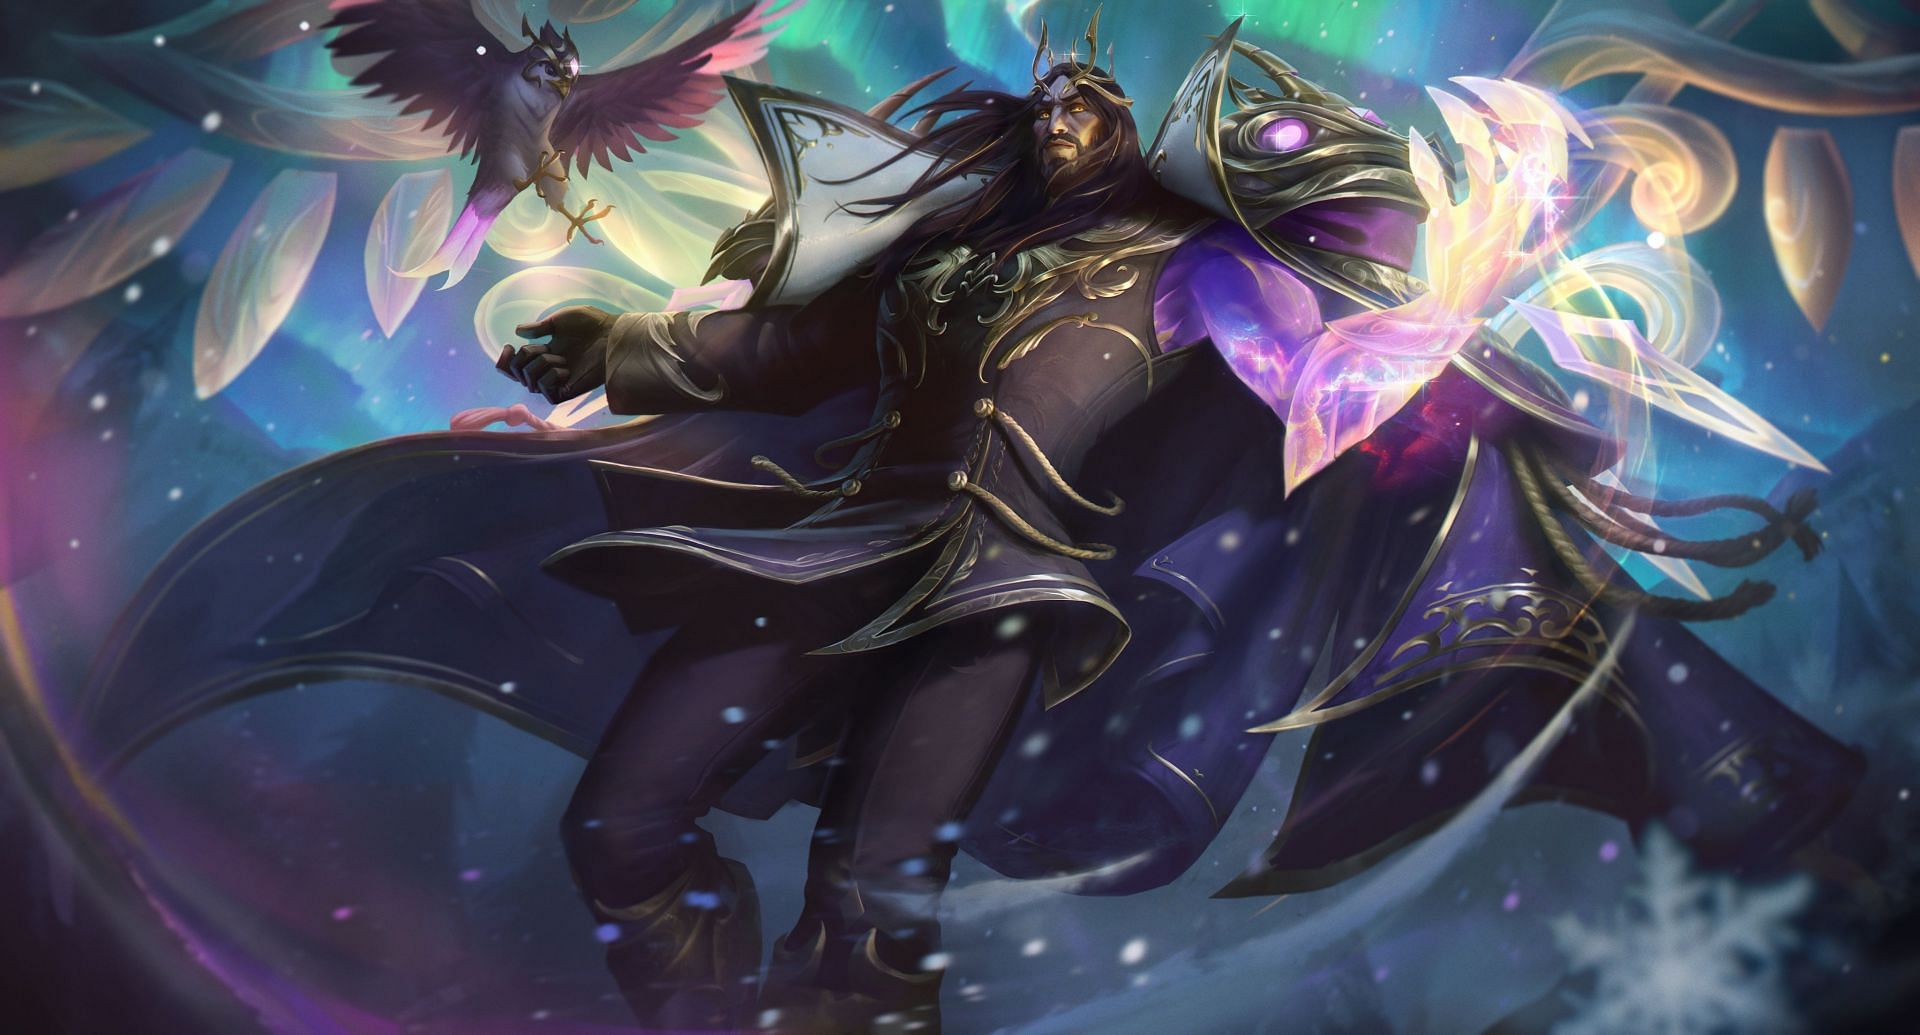 Winterblessed Swain (Image via Riot Games)